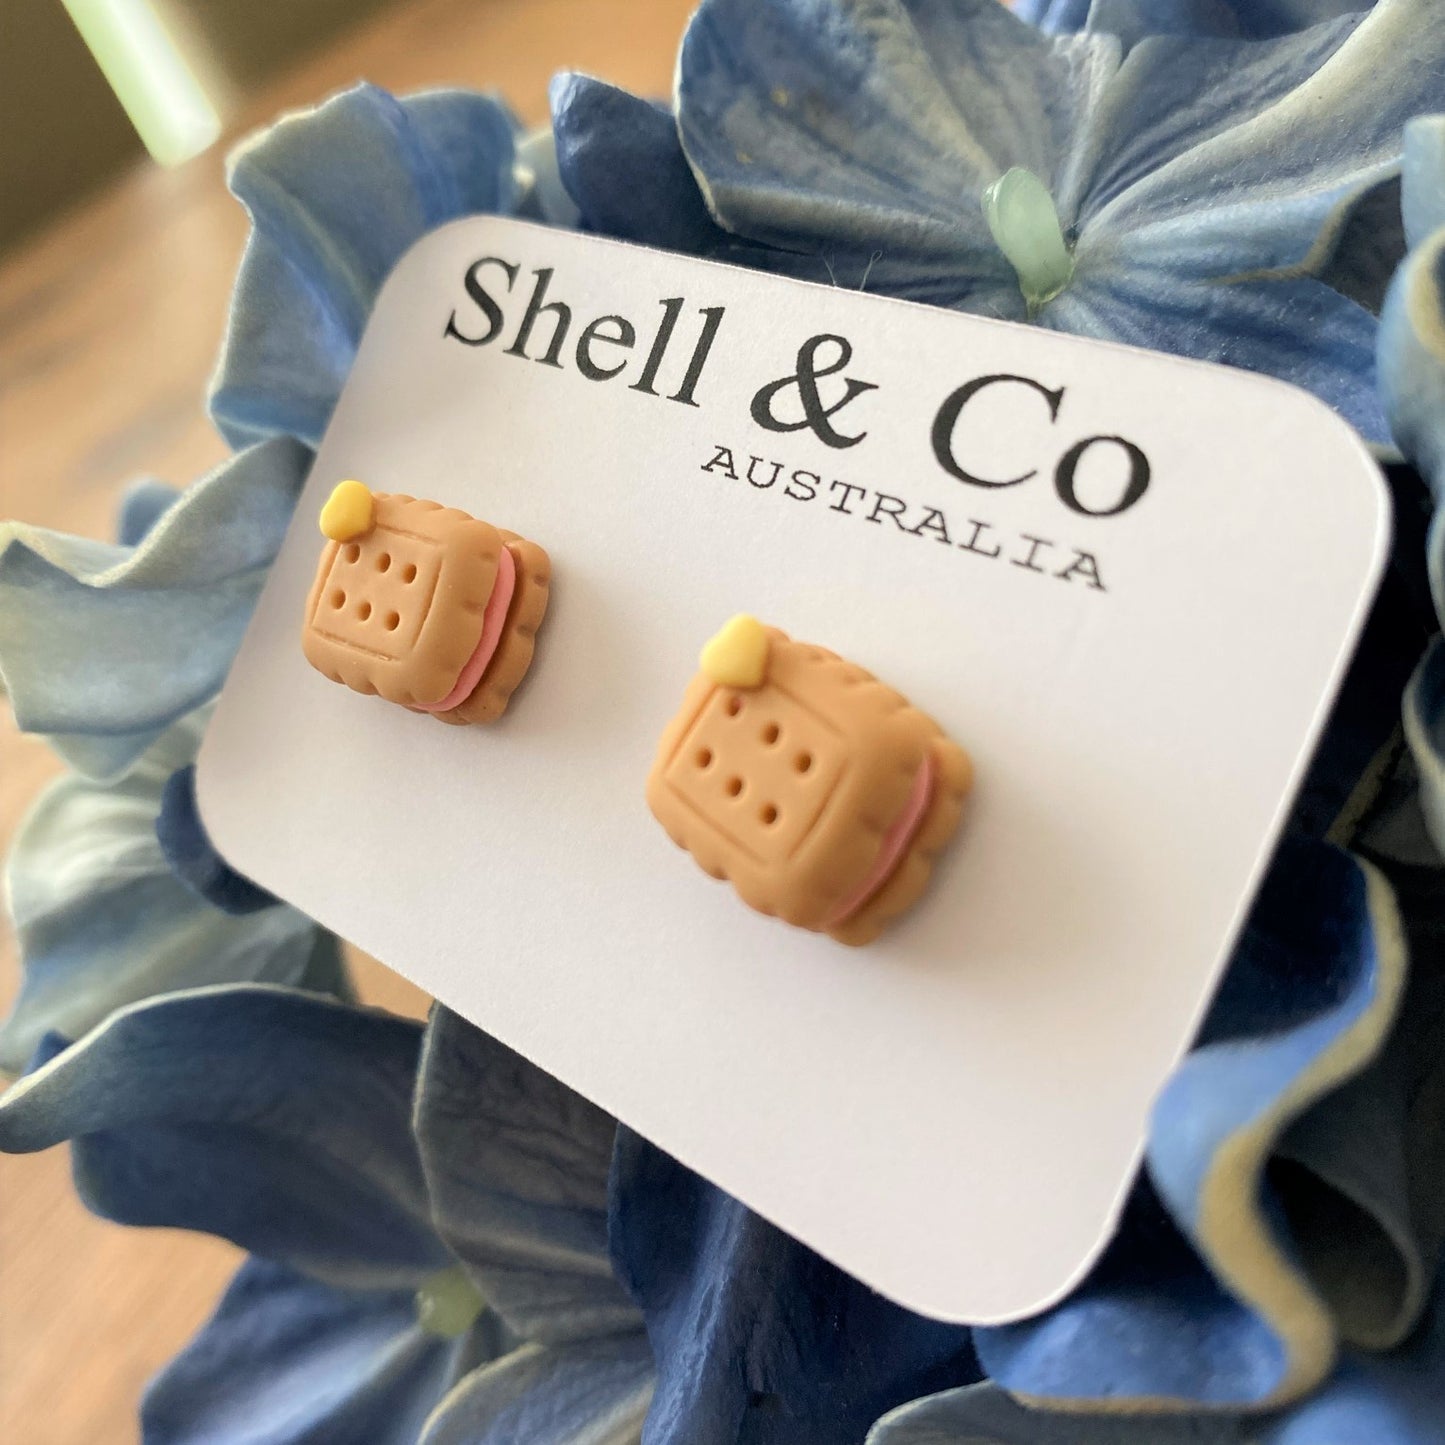 Strawberry Cream Biscuits - Clay Charm Stud Earrings